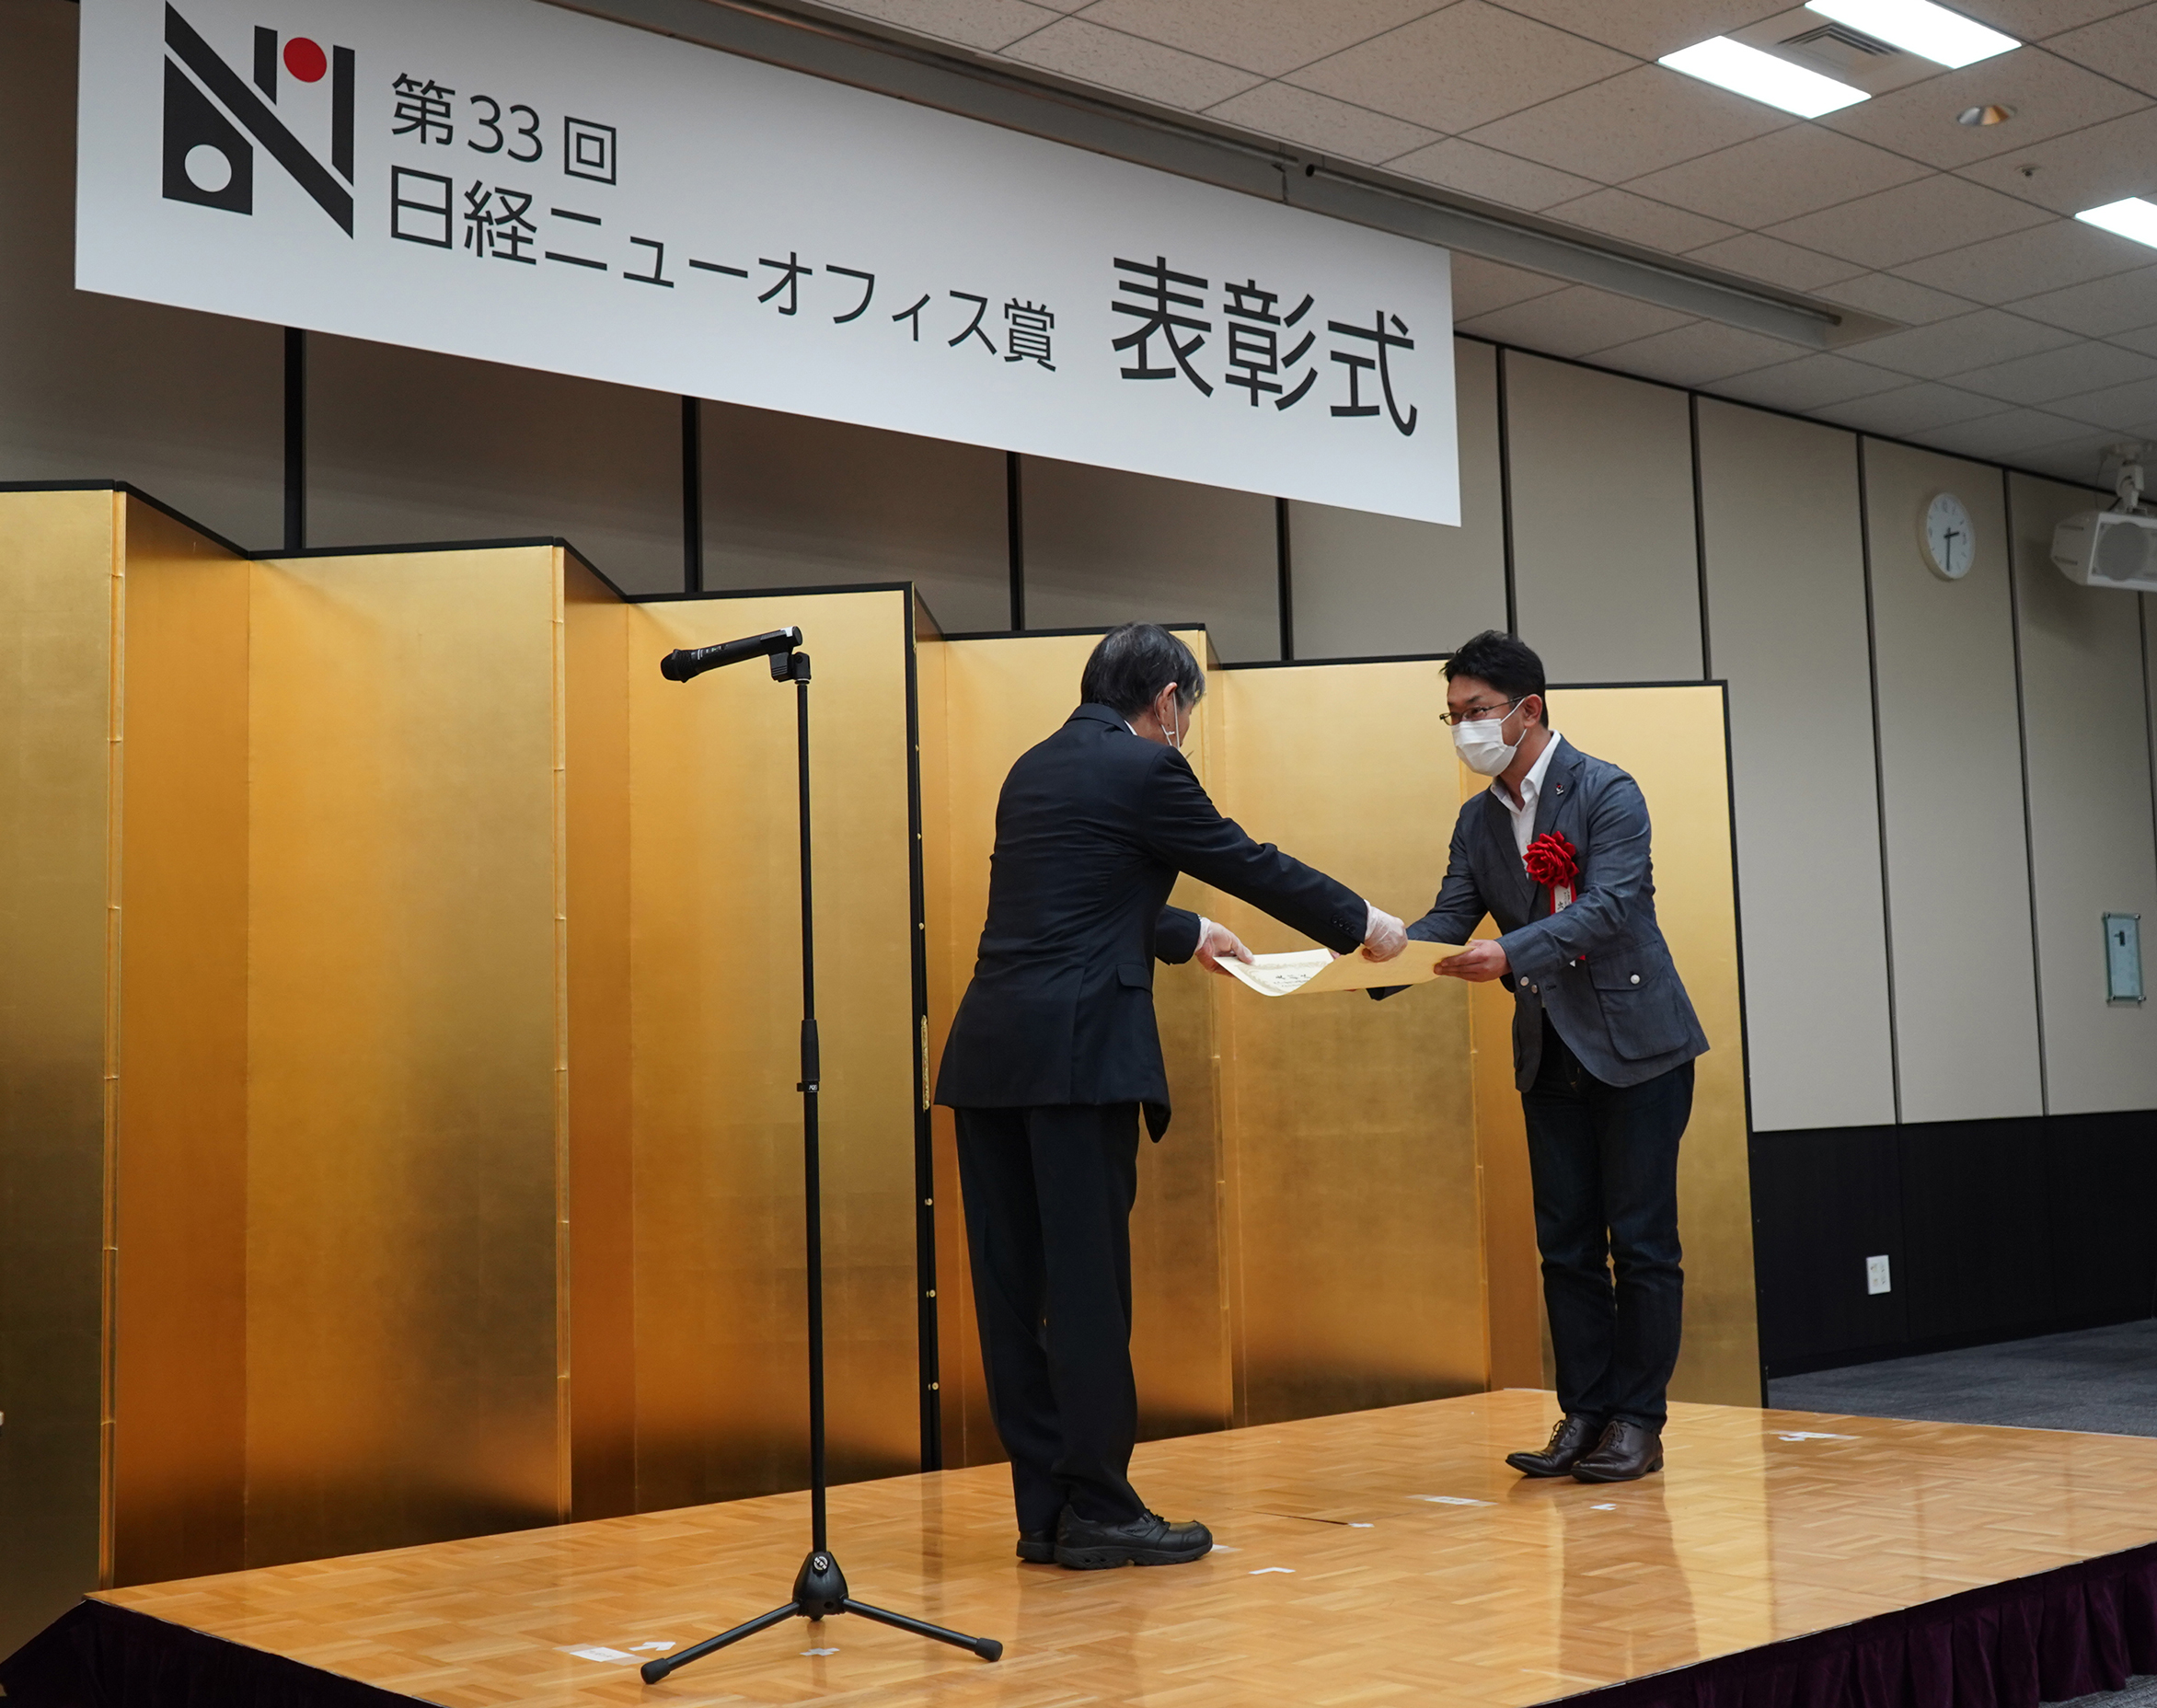 Two men are on a stage during an award ceremony. A man, wearing a suit and mask, is handing a certificate to the other man who is COO Hiroshi Mushigami, also in a suit and mask. A microphone stand is positioned on the stage, and a banner above reads "The 33rd Nikkei New Office Award Ceremony" in Japanese.